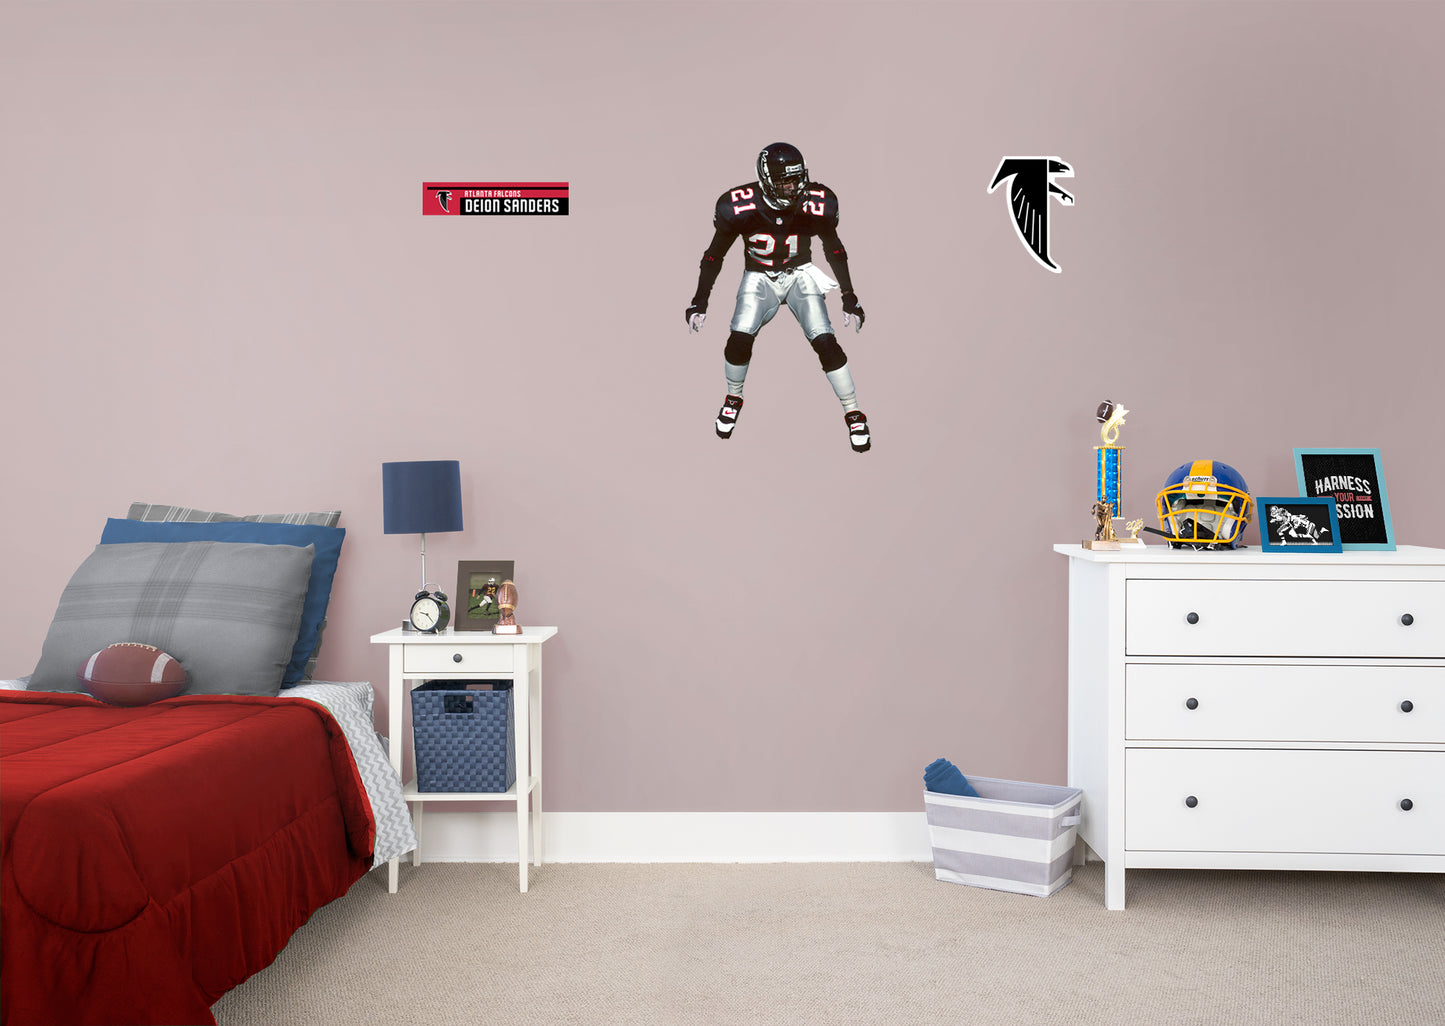 Atlanta Falcons: Deion Sanders  Legend        - Officially Licensed NFL Removable Wall   Adhesive Decal